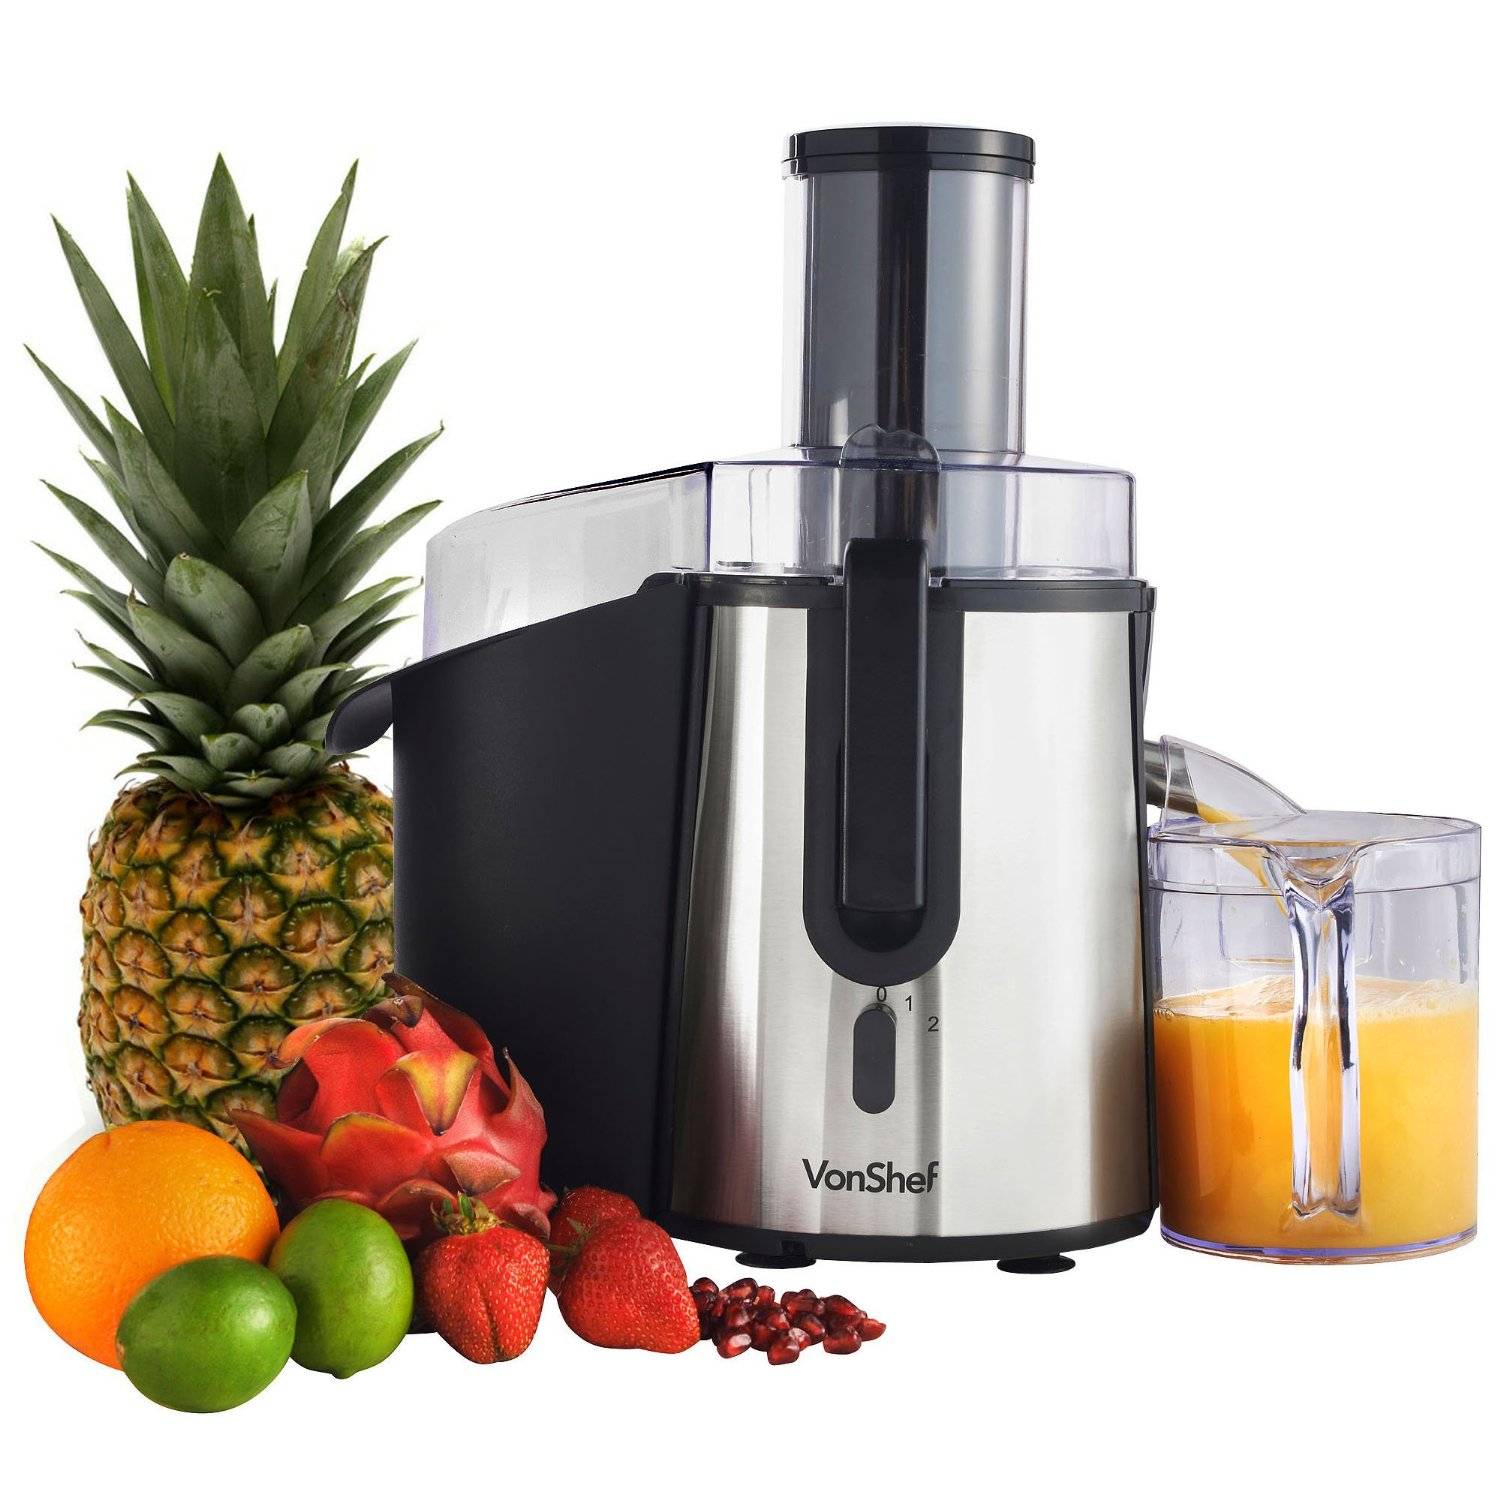 8-vonshef-professional-powerful-wide-mouth-whole-fruit-juicer-700w-max-power-motor